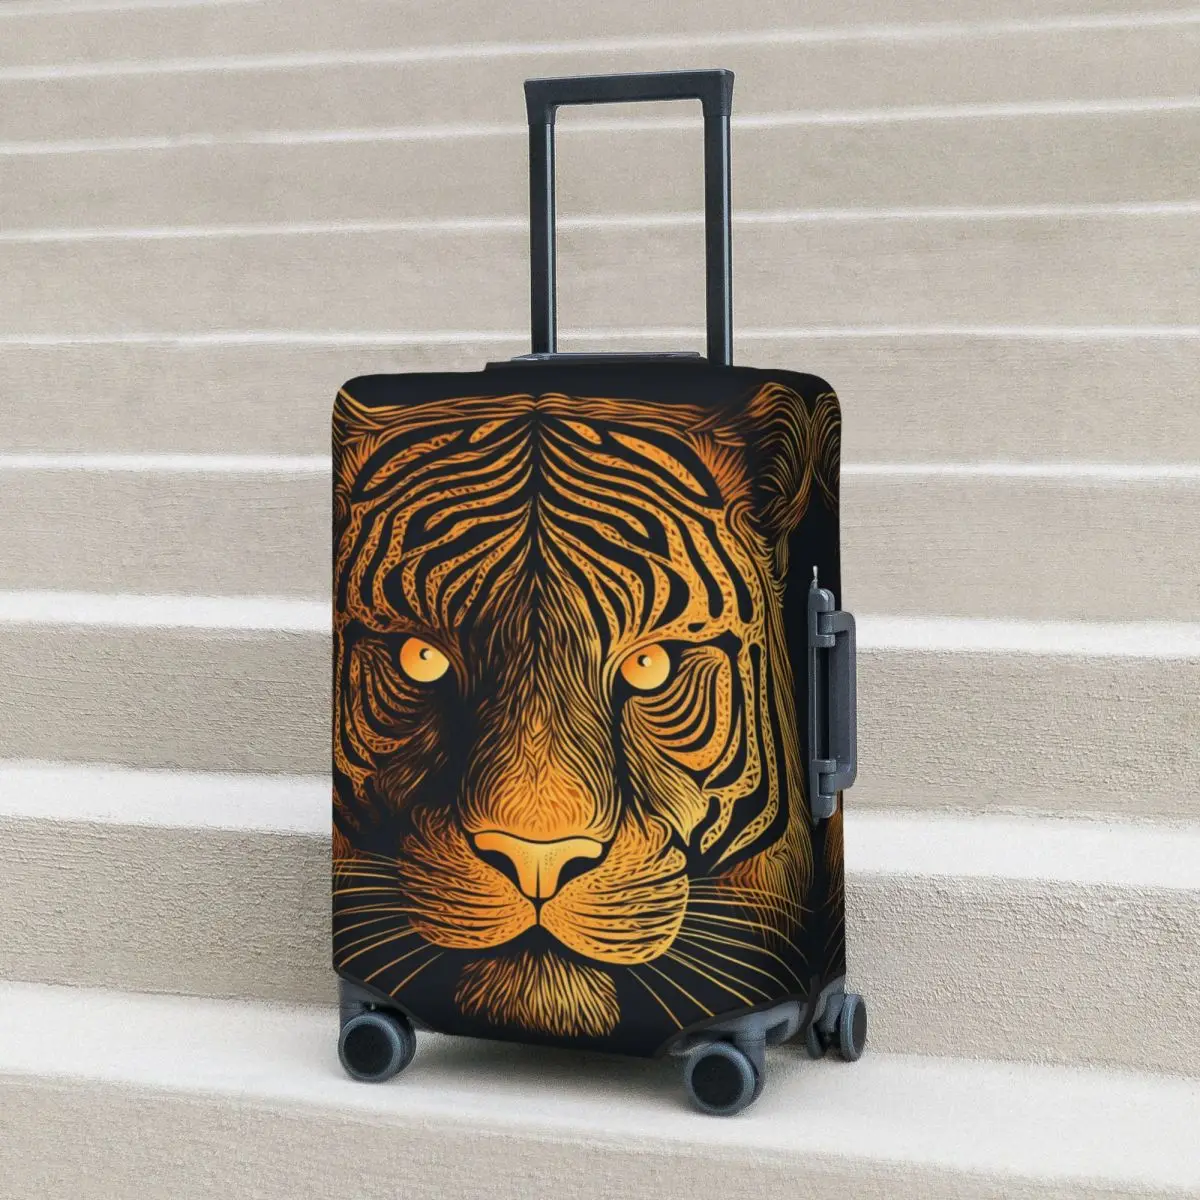 

Tiger Suitcase Cover Psychedelic Lines Portraits Cruise Trip Protection Flight Fun Luggage Accesories